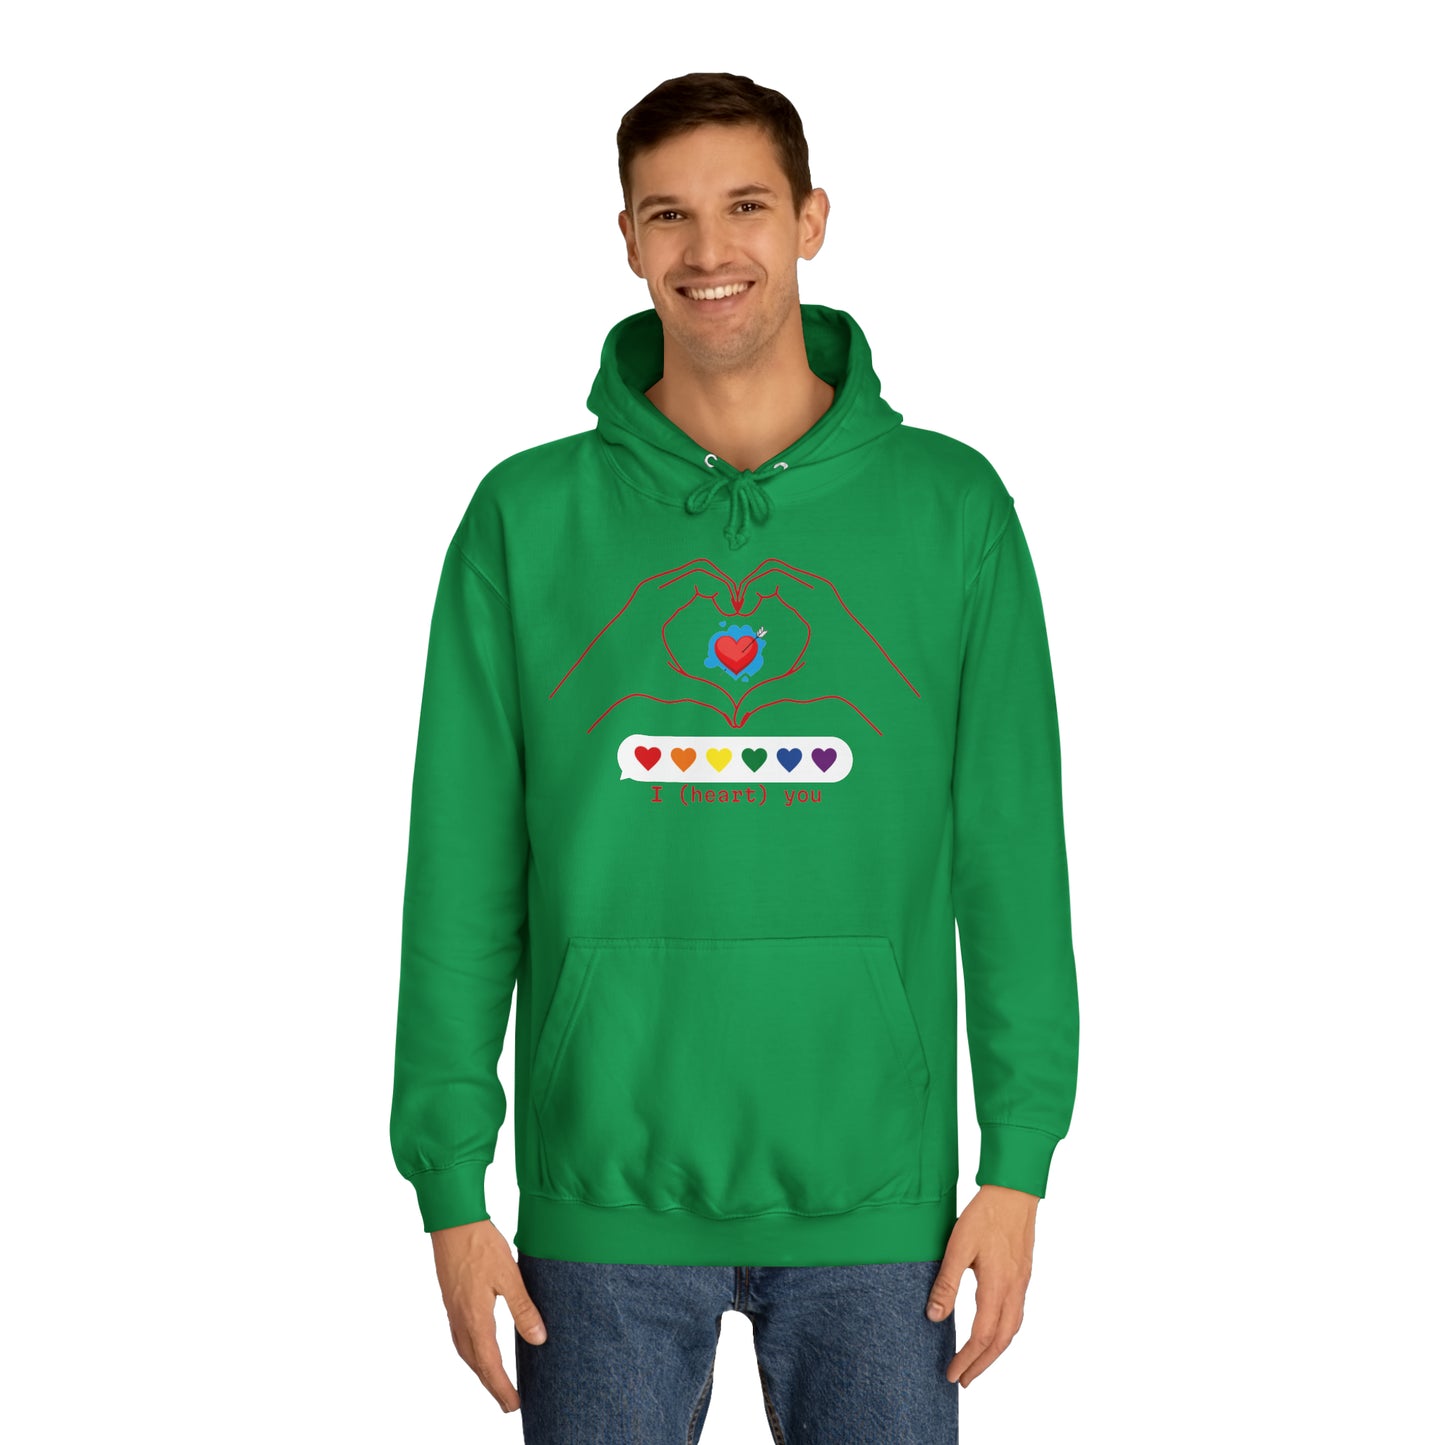 I Heart You College Hoodie, Your Canvas for Personalized Style!